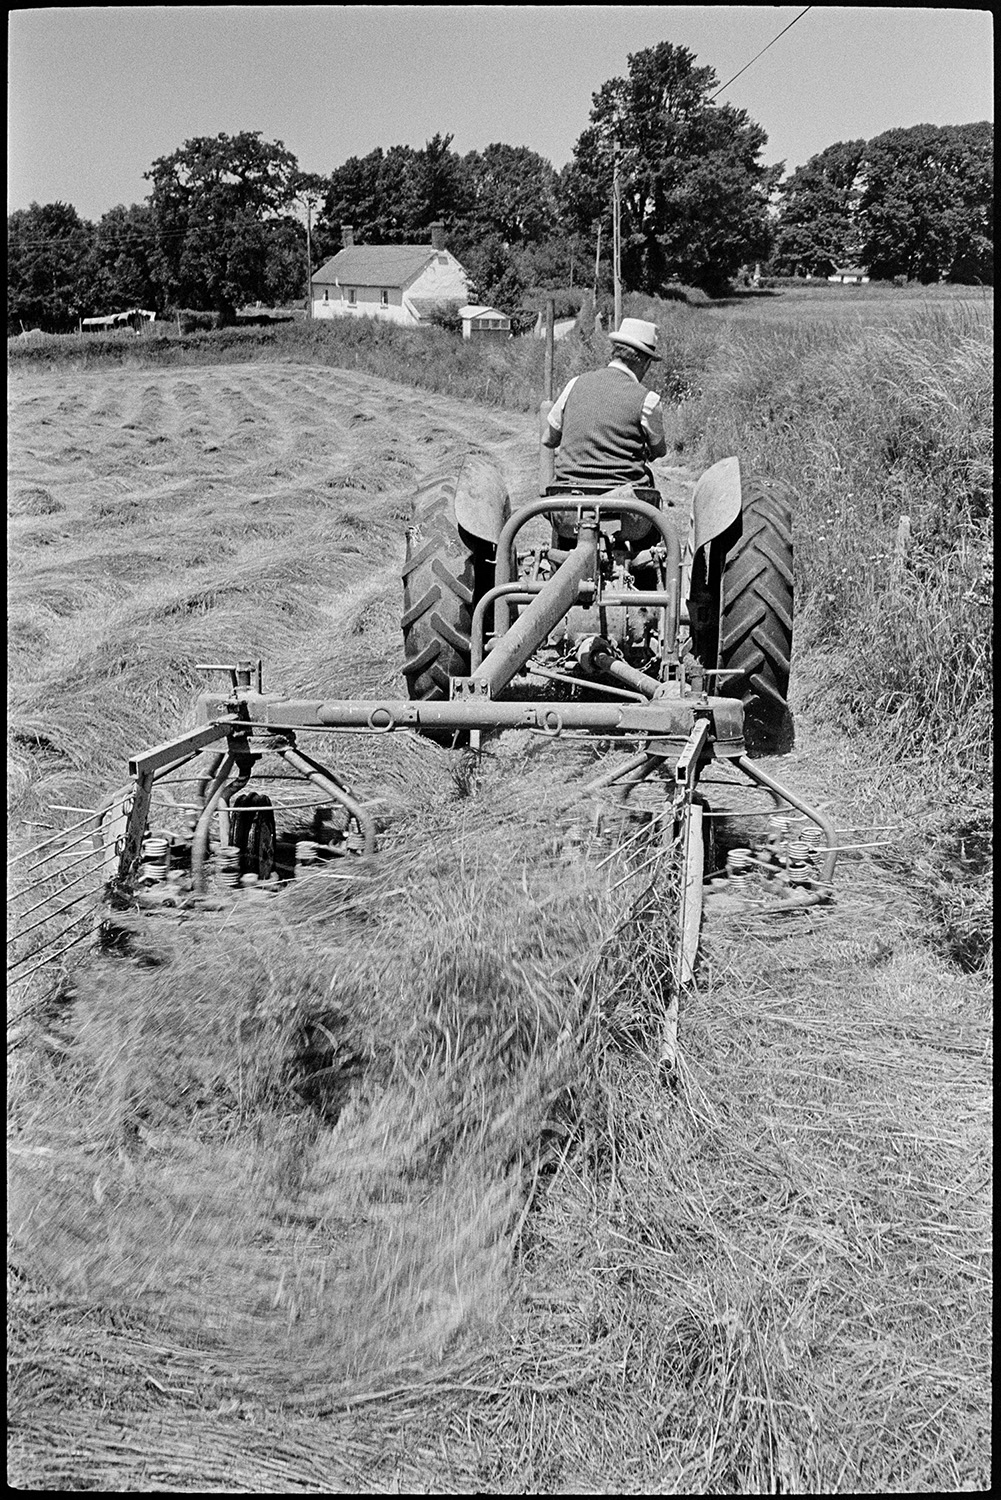 Farmer whisking hay.
[John Ward turning hay with a whisk and tractor in a field at Parsonage, Iddesleigh. A house is visible in the background.]